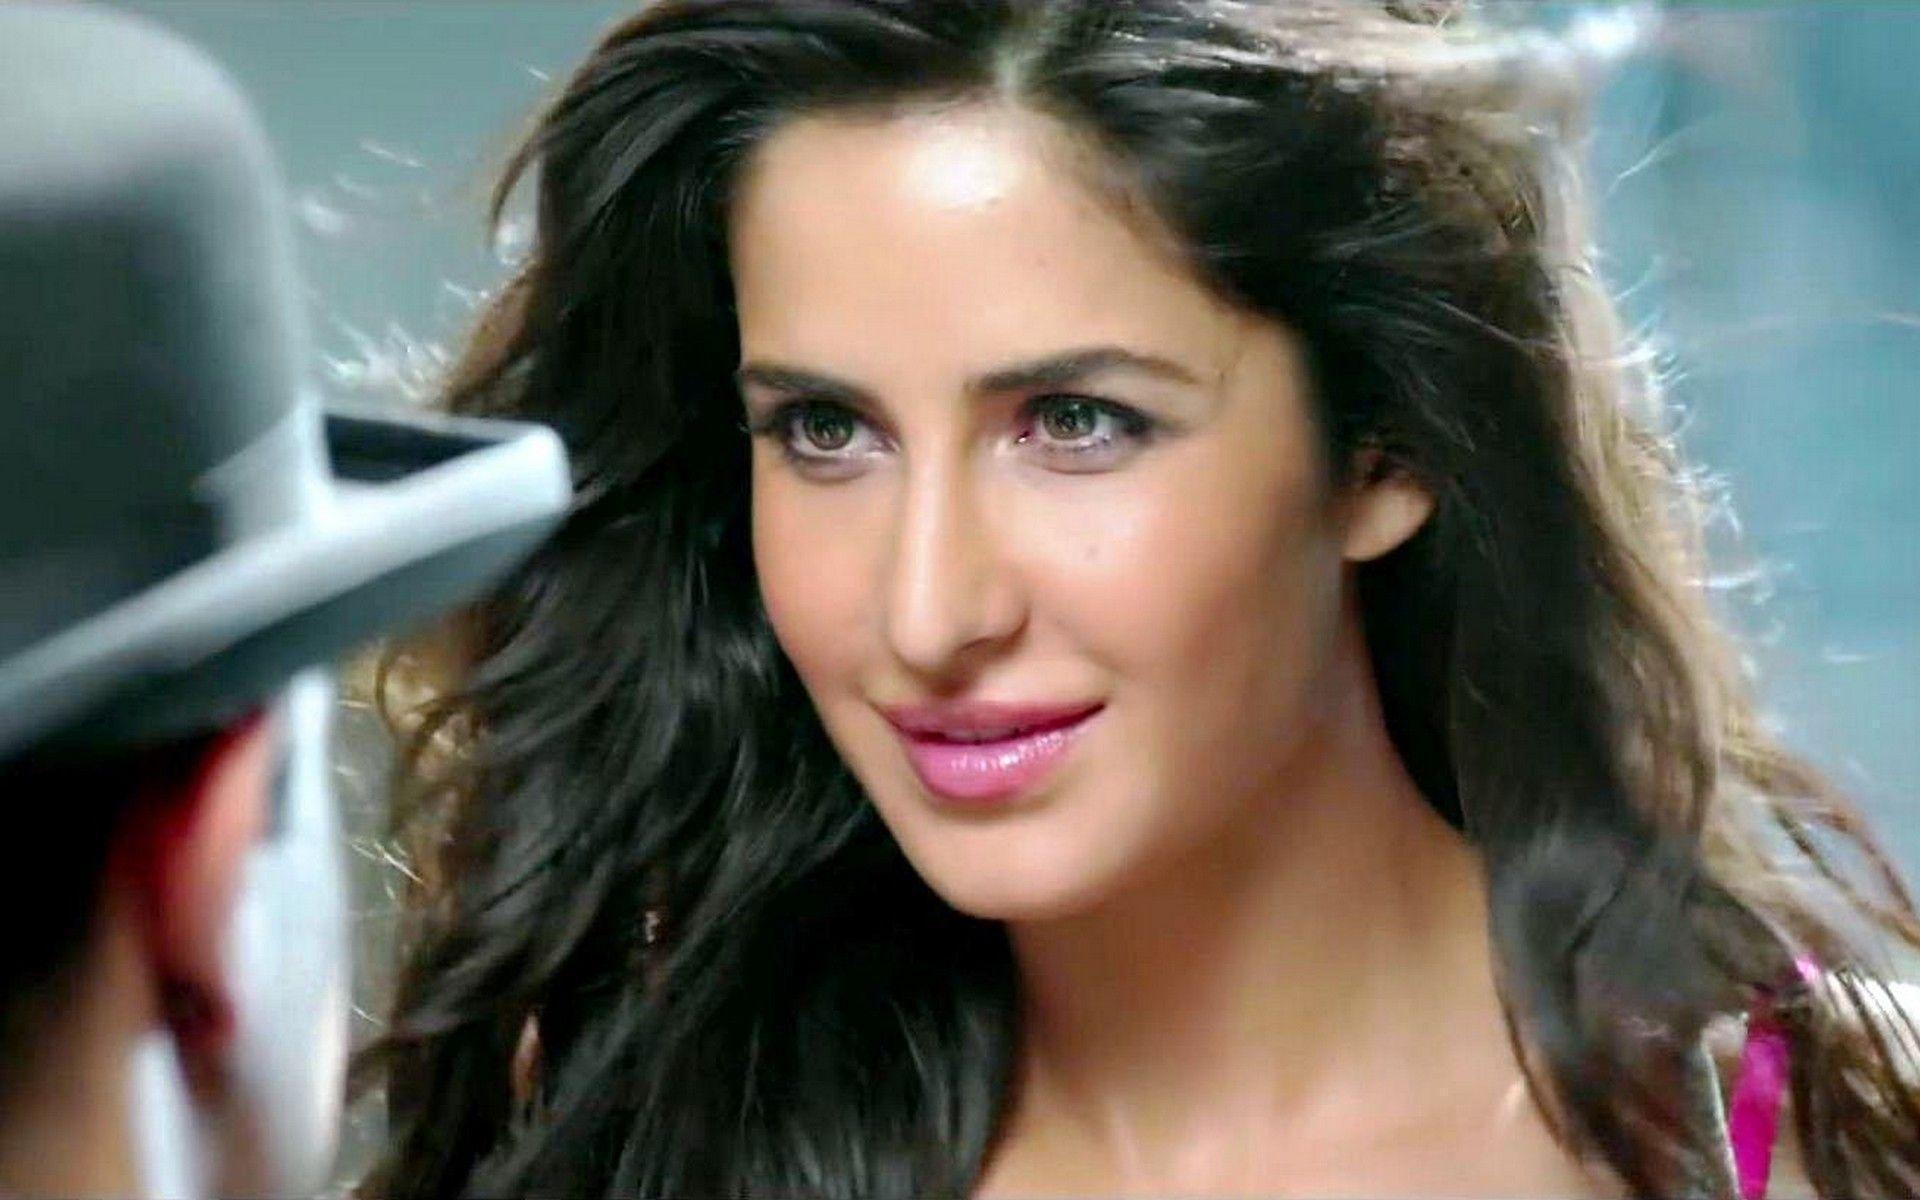 KATRINA KAIF In Dhoom 3 HD Wallpaper And Picture